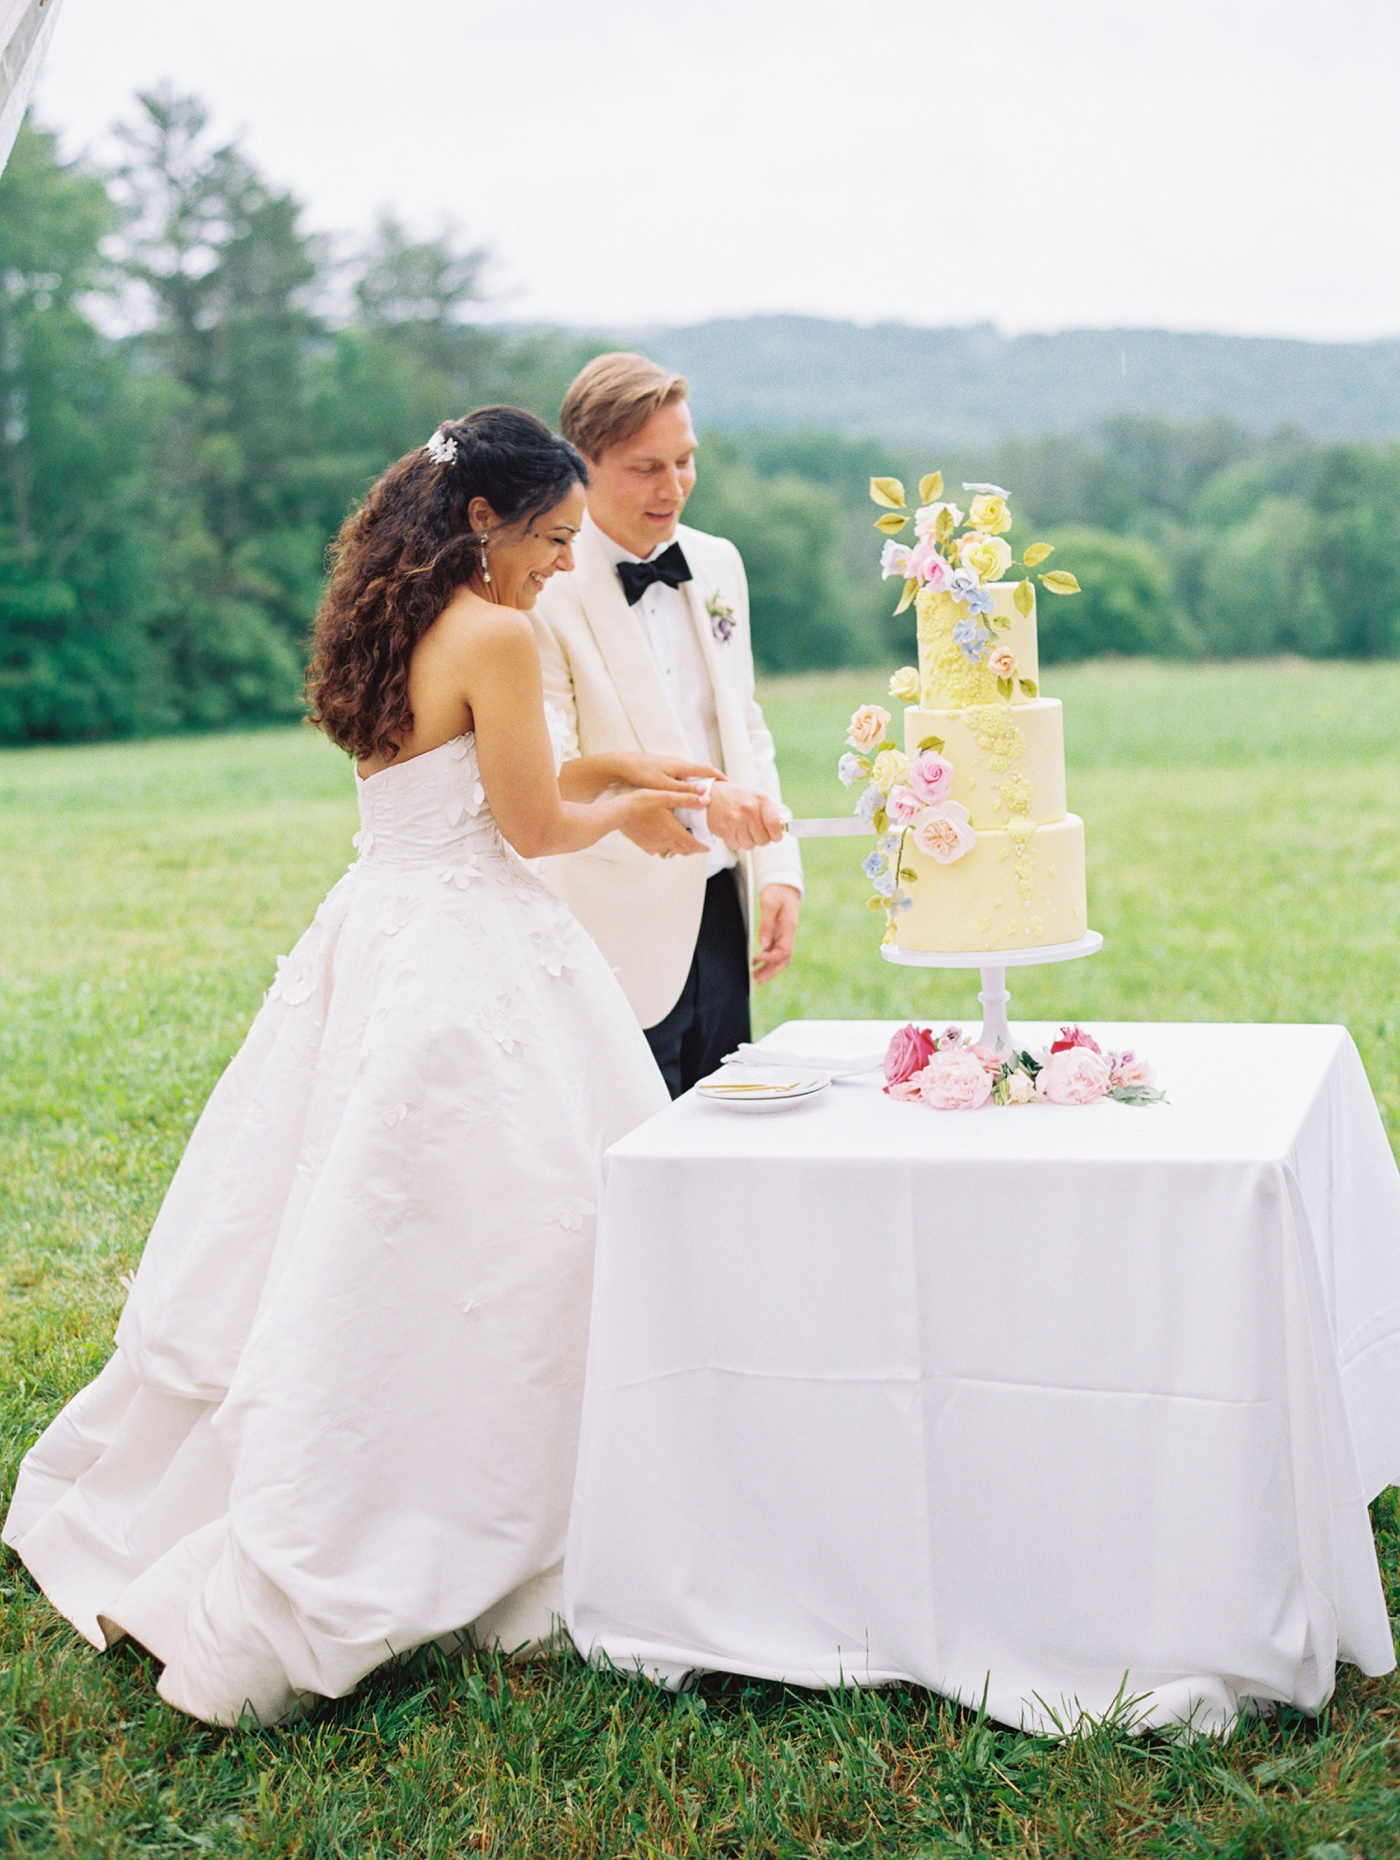 Tented garden wedding reception at a private property in Vermont